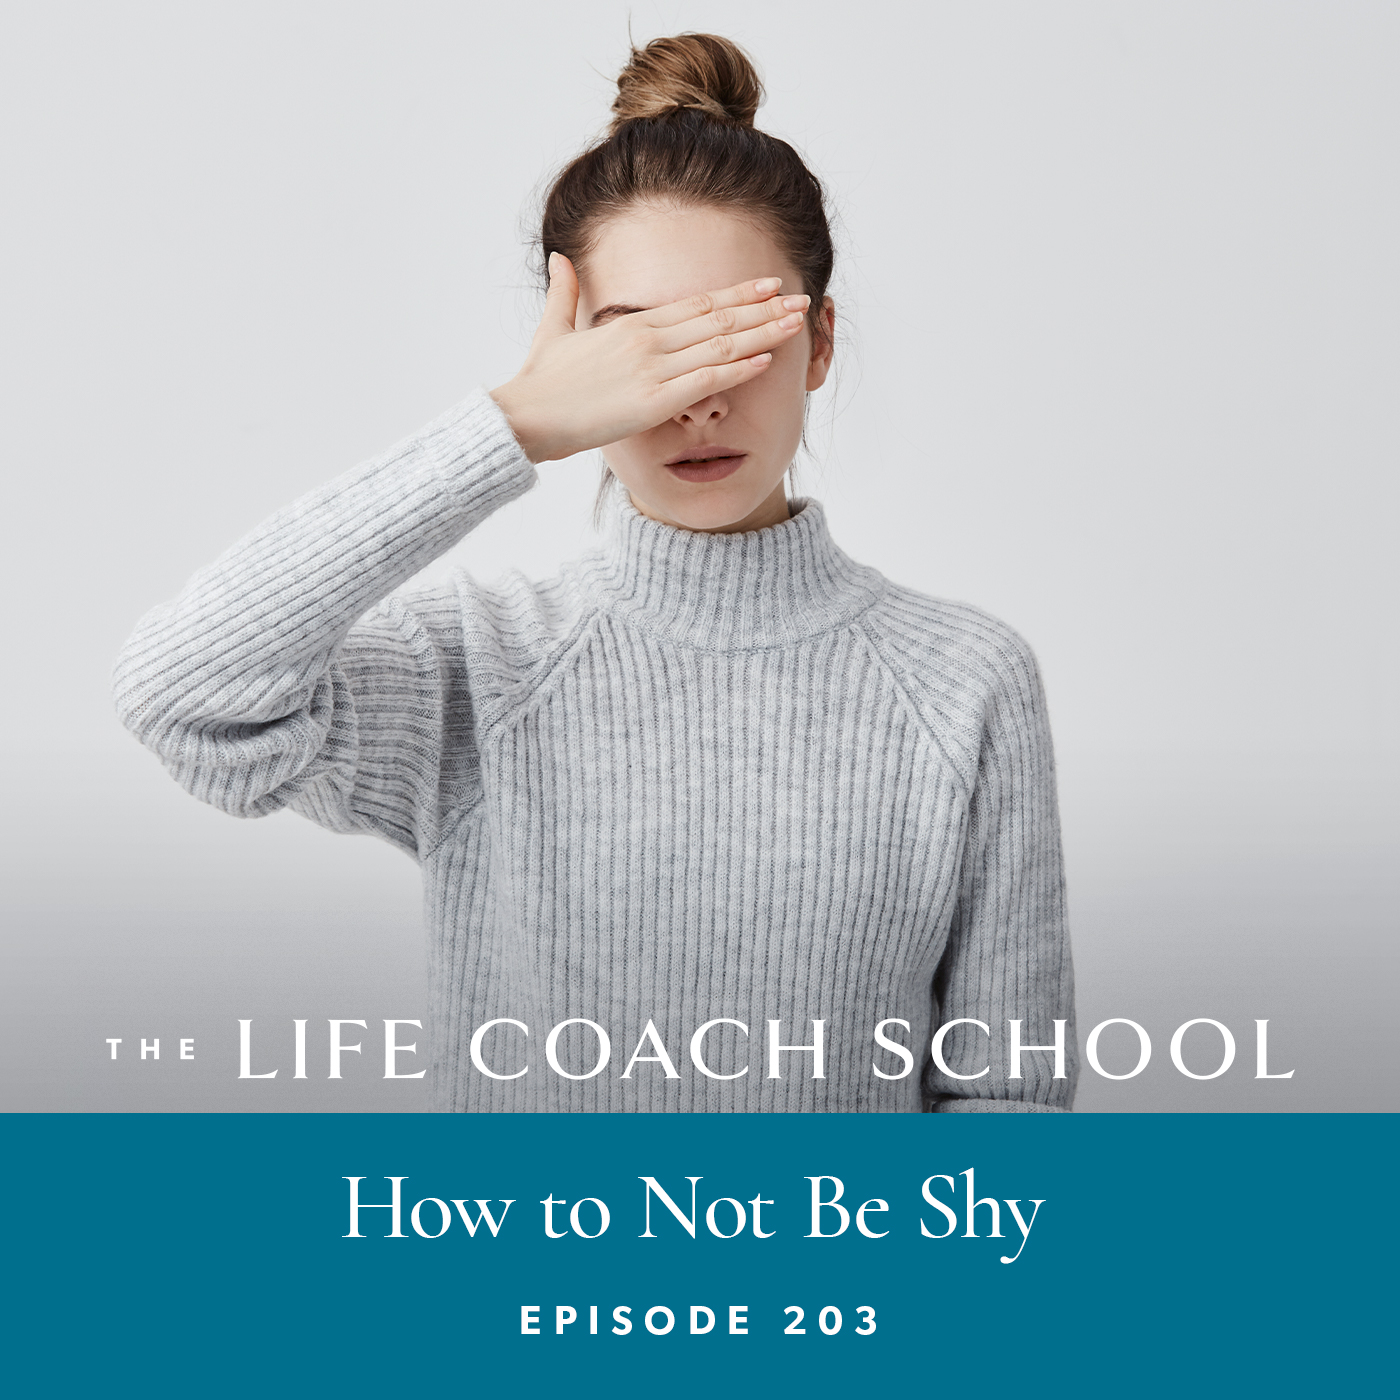 The Life Coach School Podcast with Brooke Castillo | Episode 203 | How to Not Be Shy